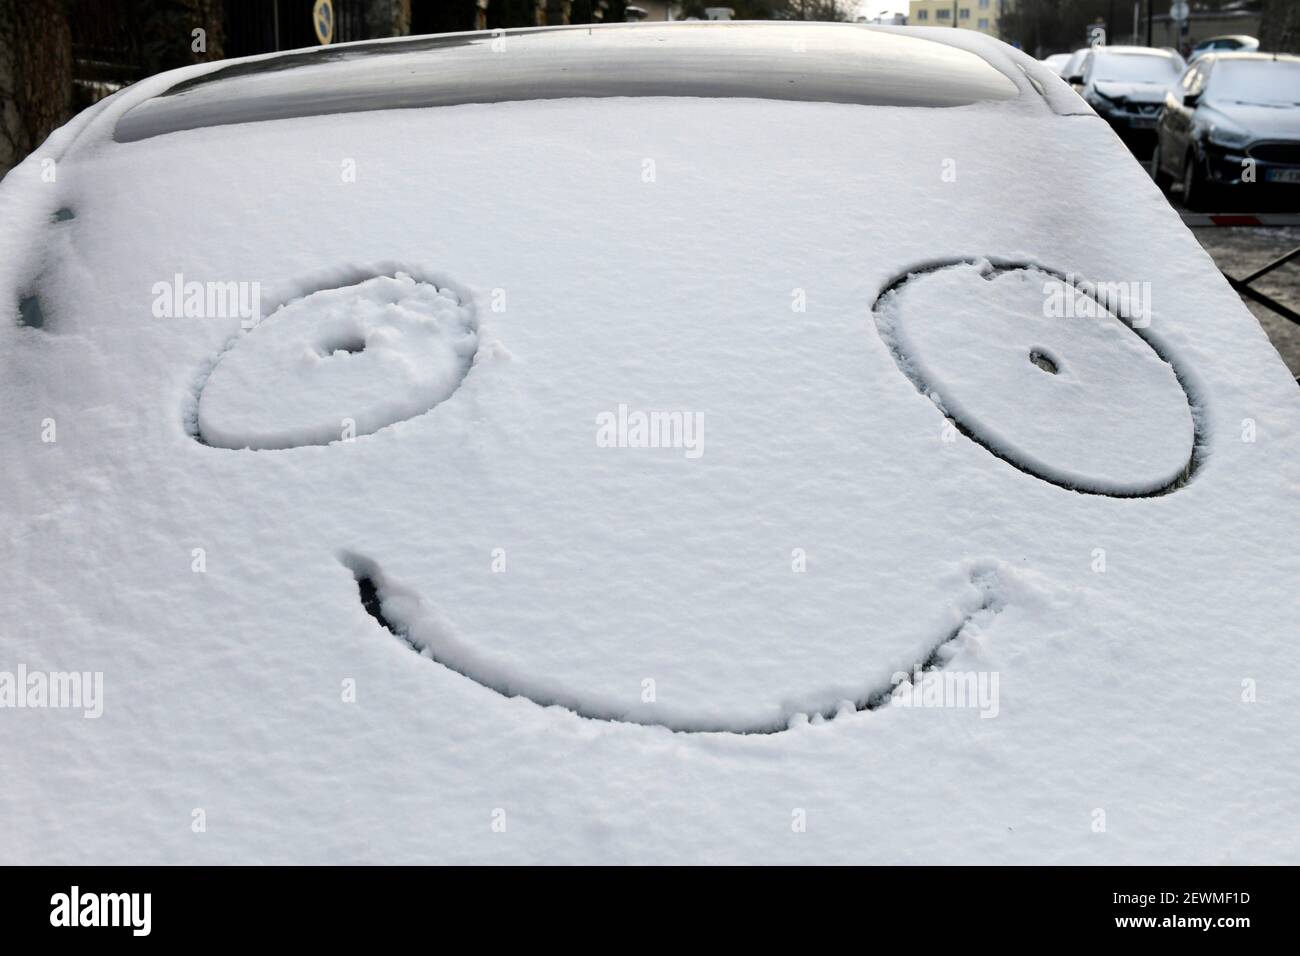 Smiley drawn in the snow on the front of a car in Sartrouville, Yvelines, France. Stock Photo